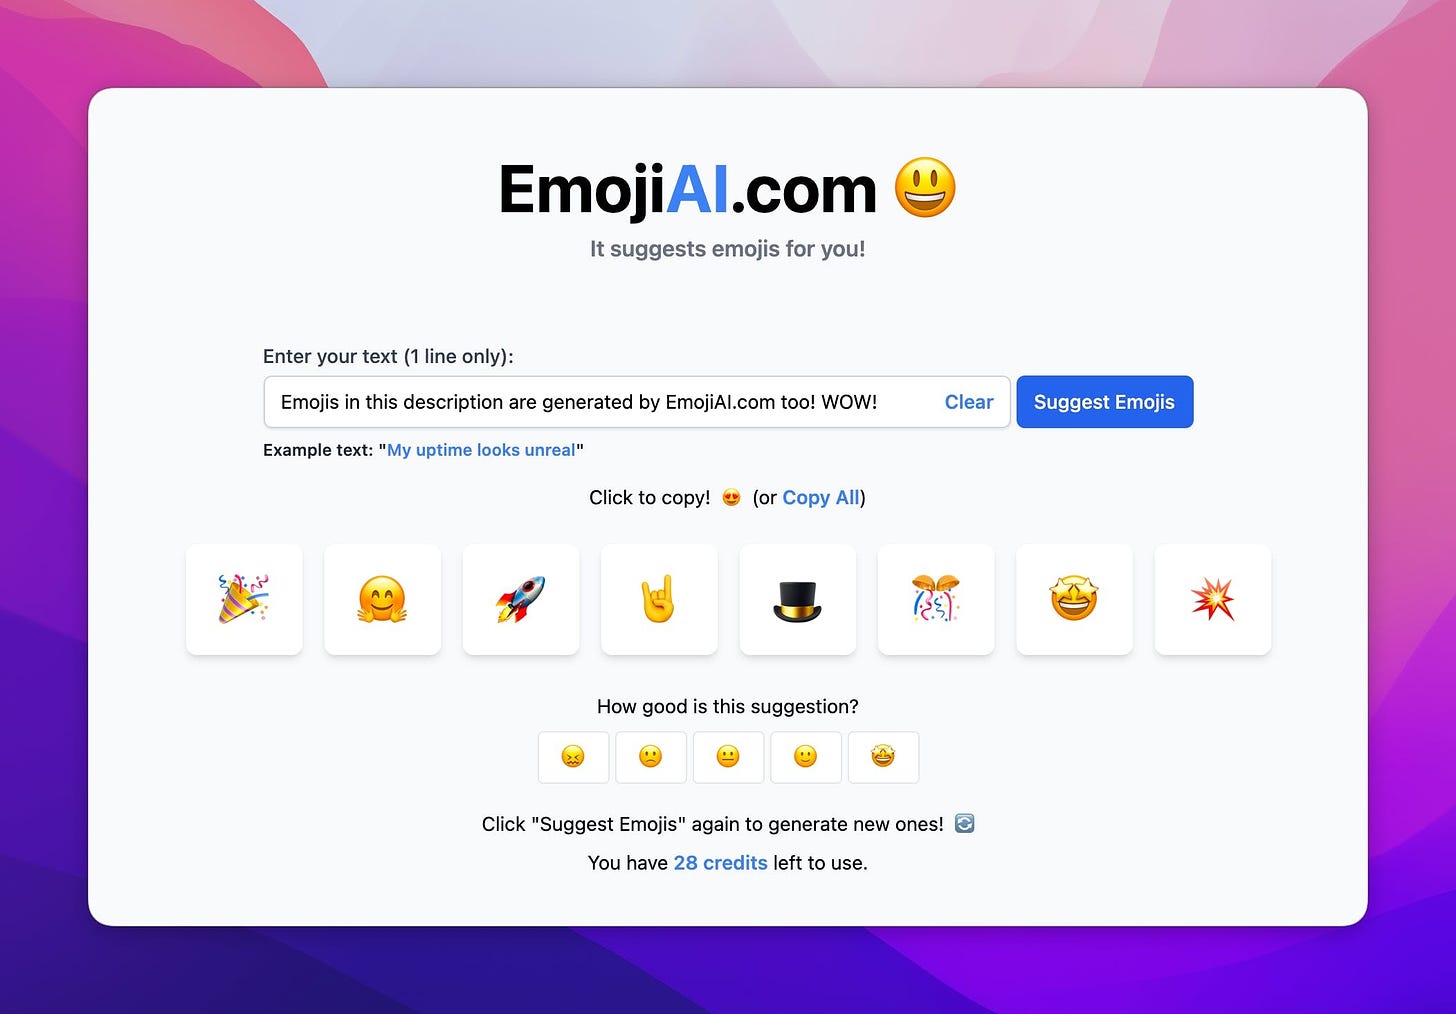 Give it a try at EmojiAI.com 😁